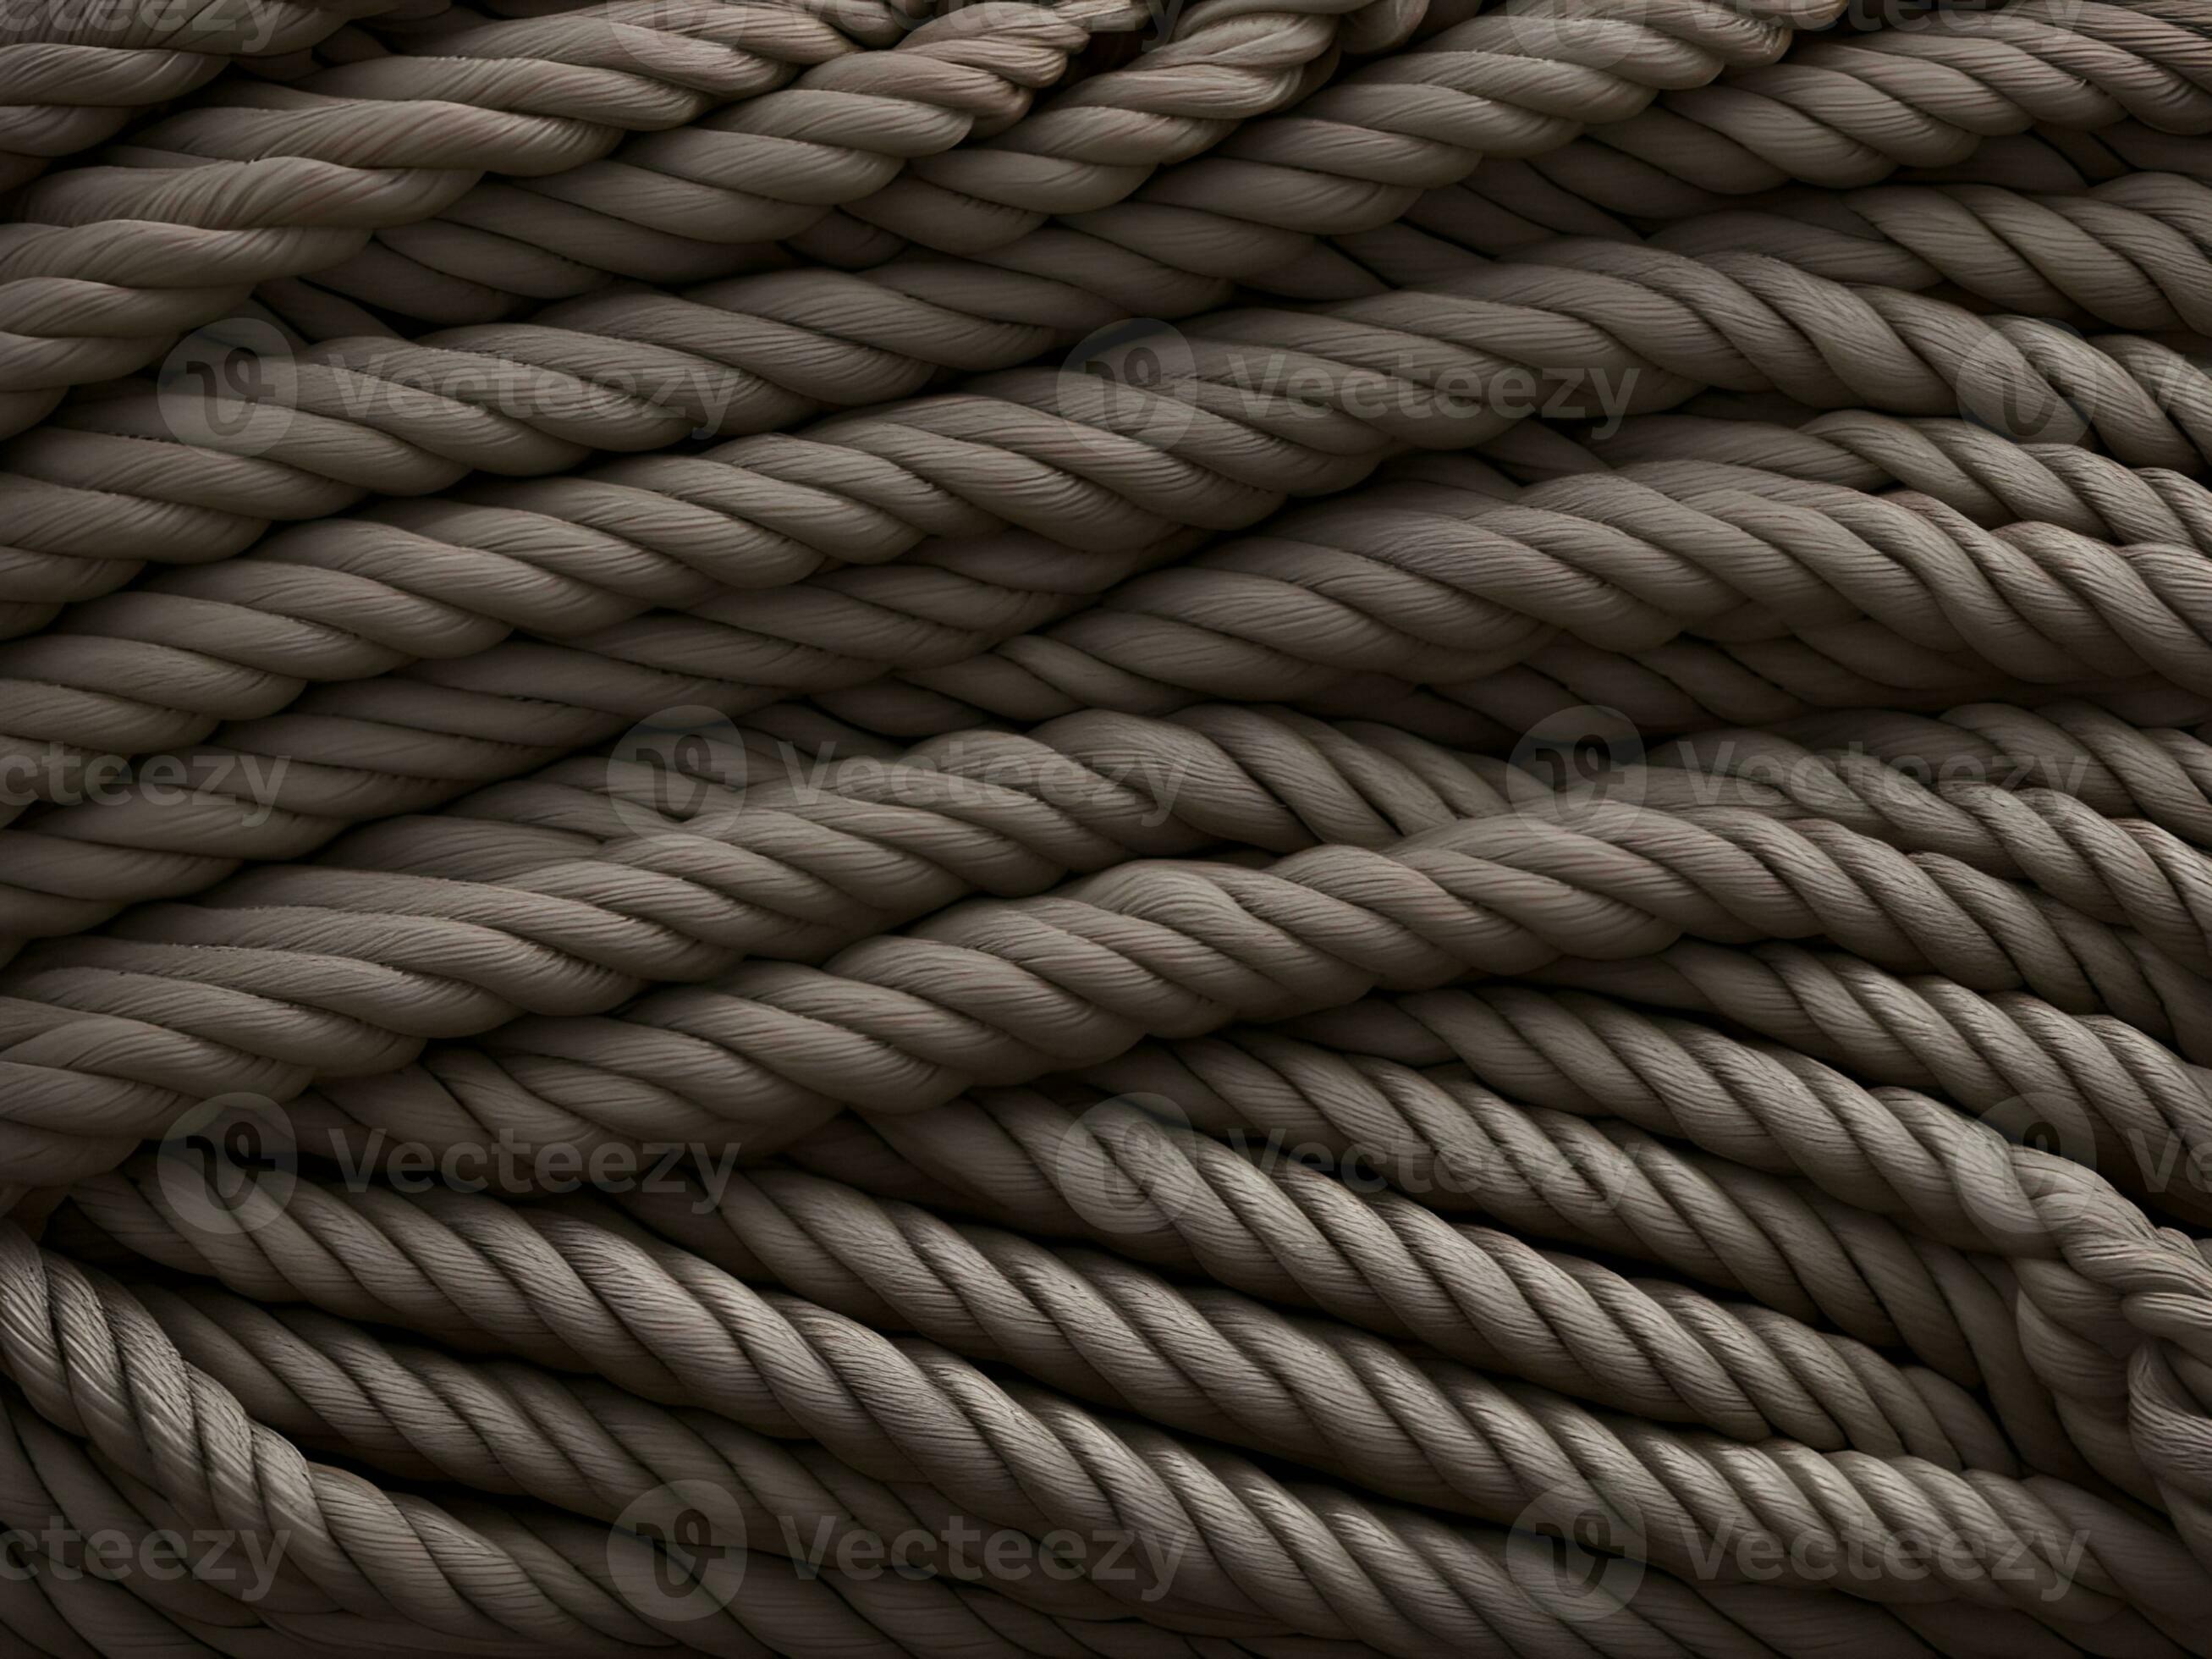 https://static.vecteezy.com/system/resources/previews/031/095/596/large_2x/close-up-of-a-wicker-rope-texture-photo.JPG